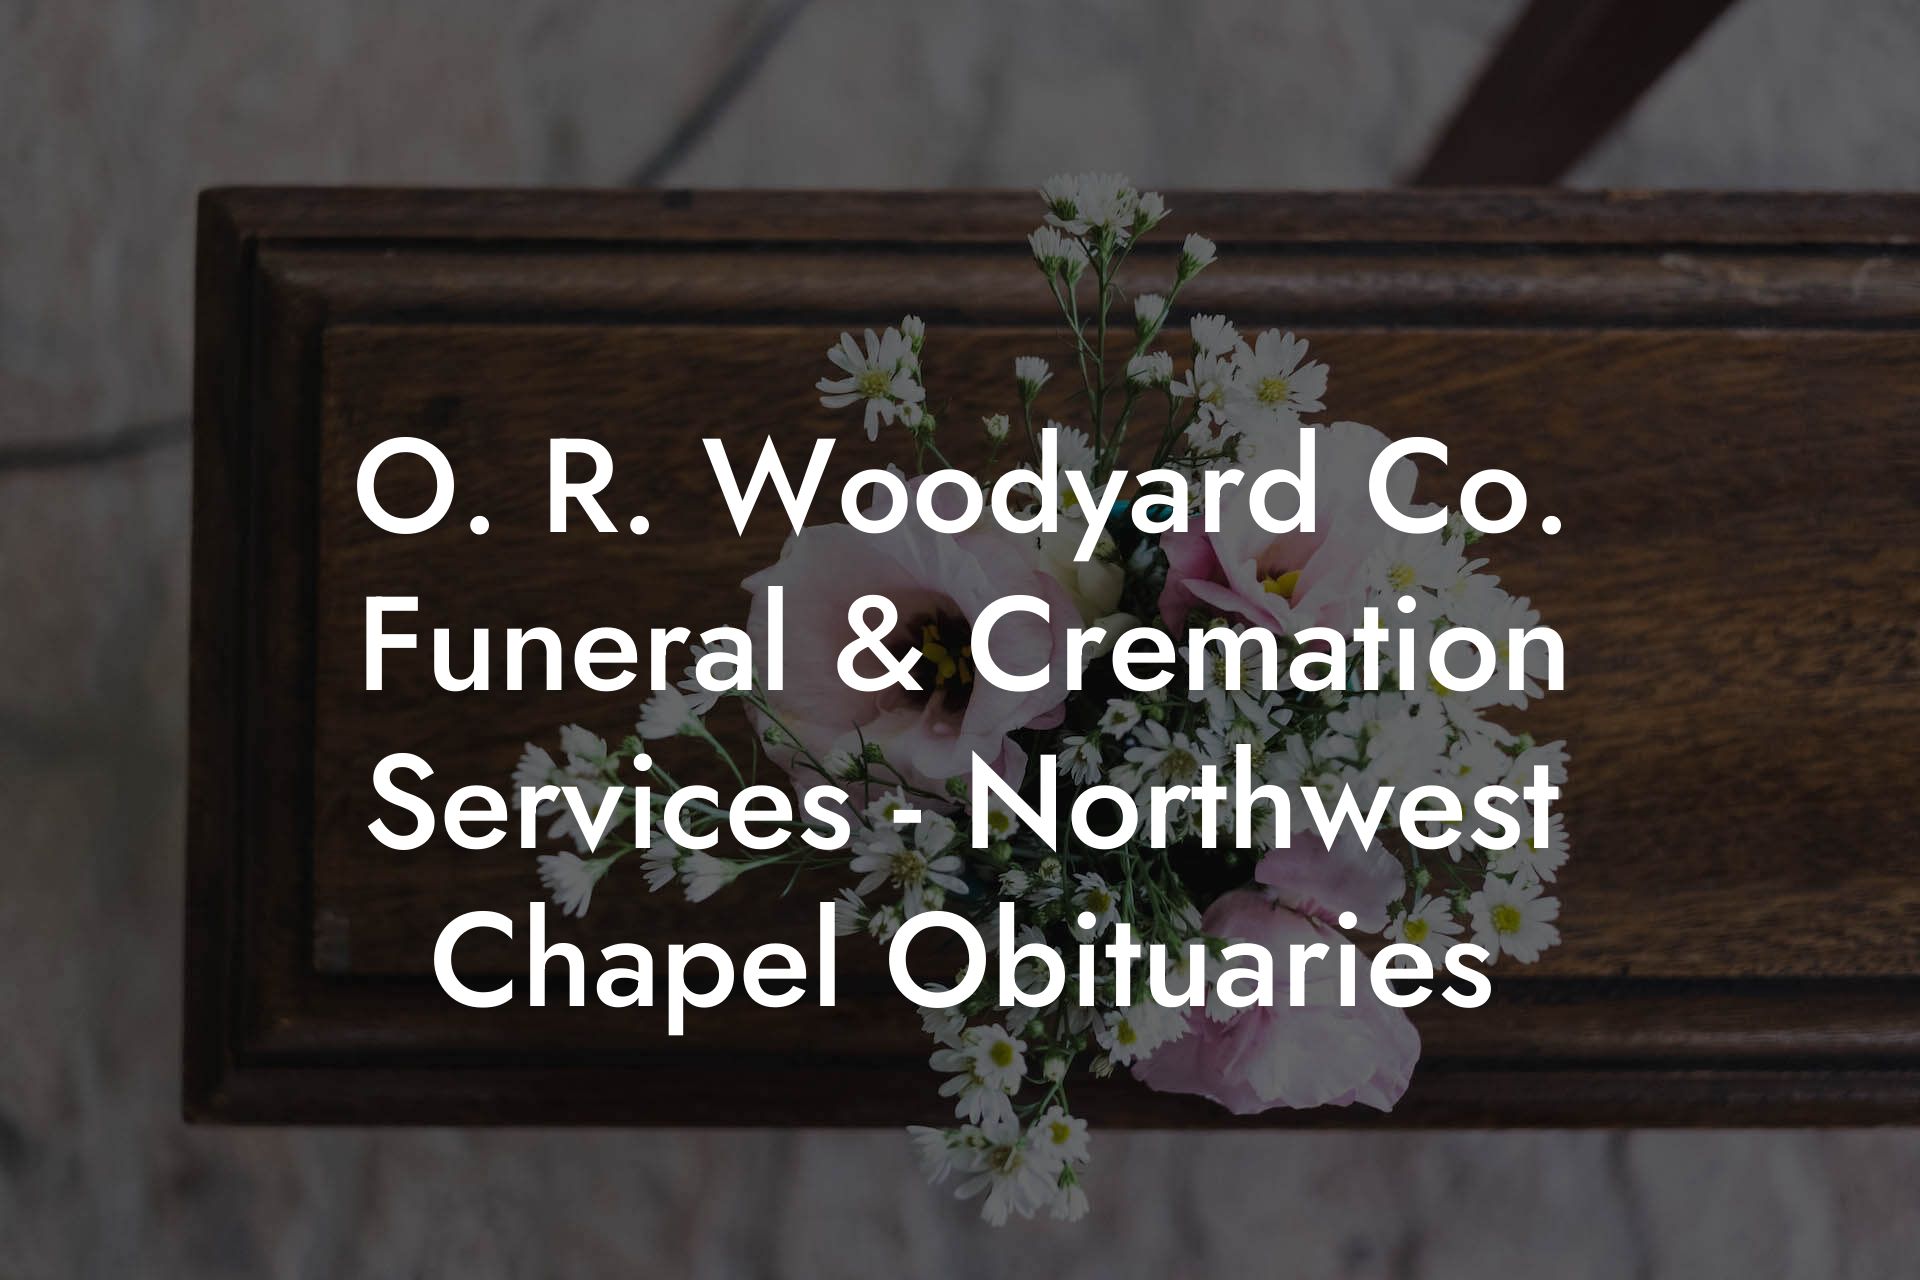 O. R. Woodyard Co. Funeral & Cremation Services - Northwest Chapel Obituaries